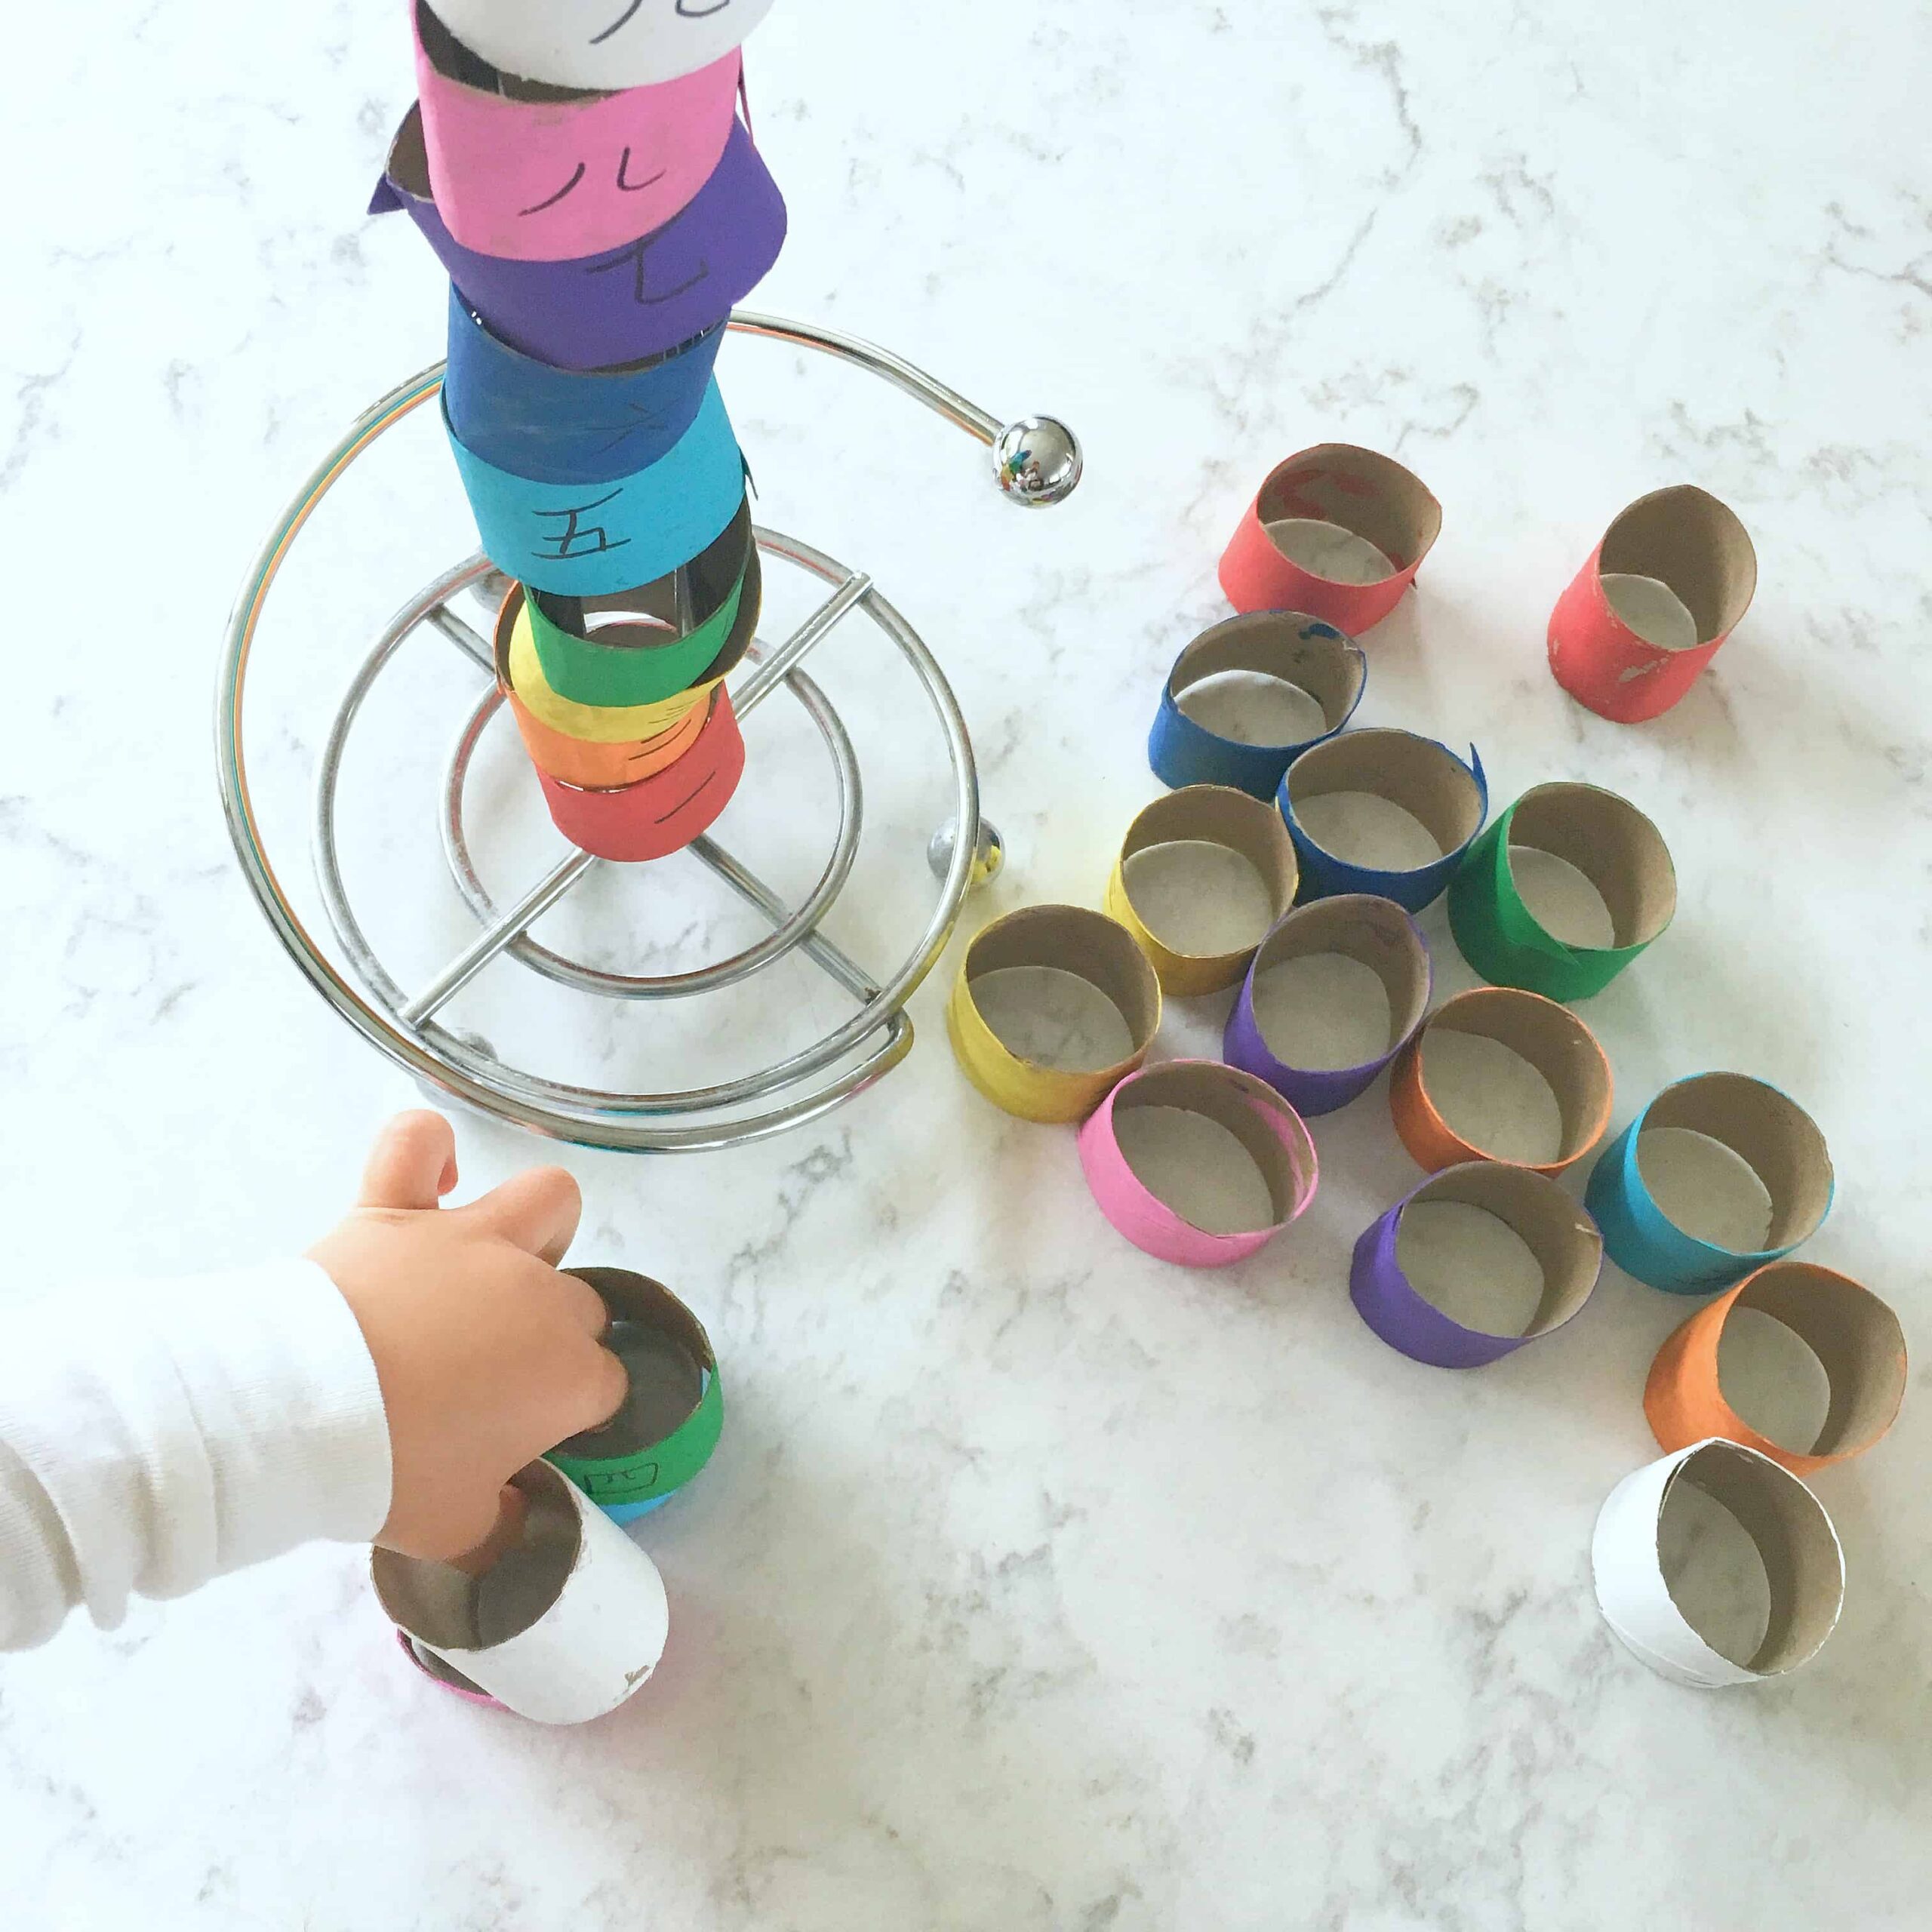 Number & Color Patterns With Recycled Paper Rolls